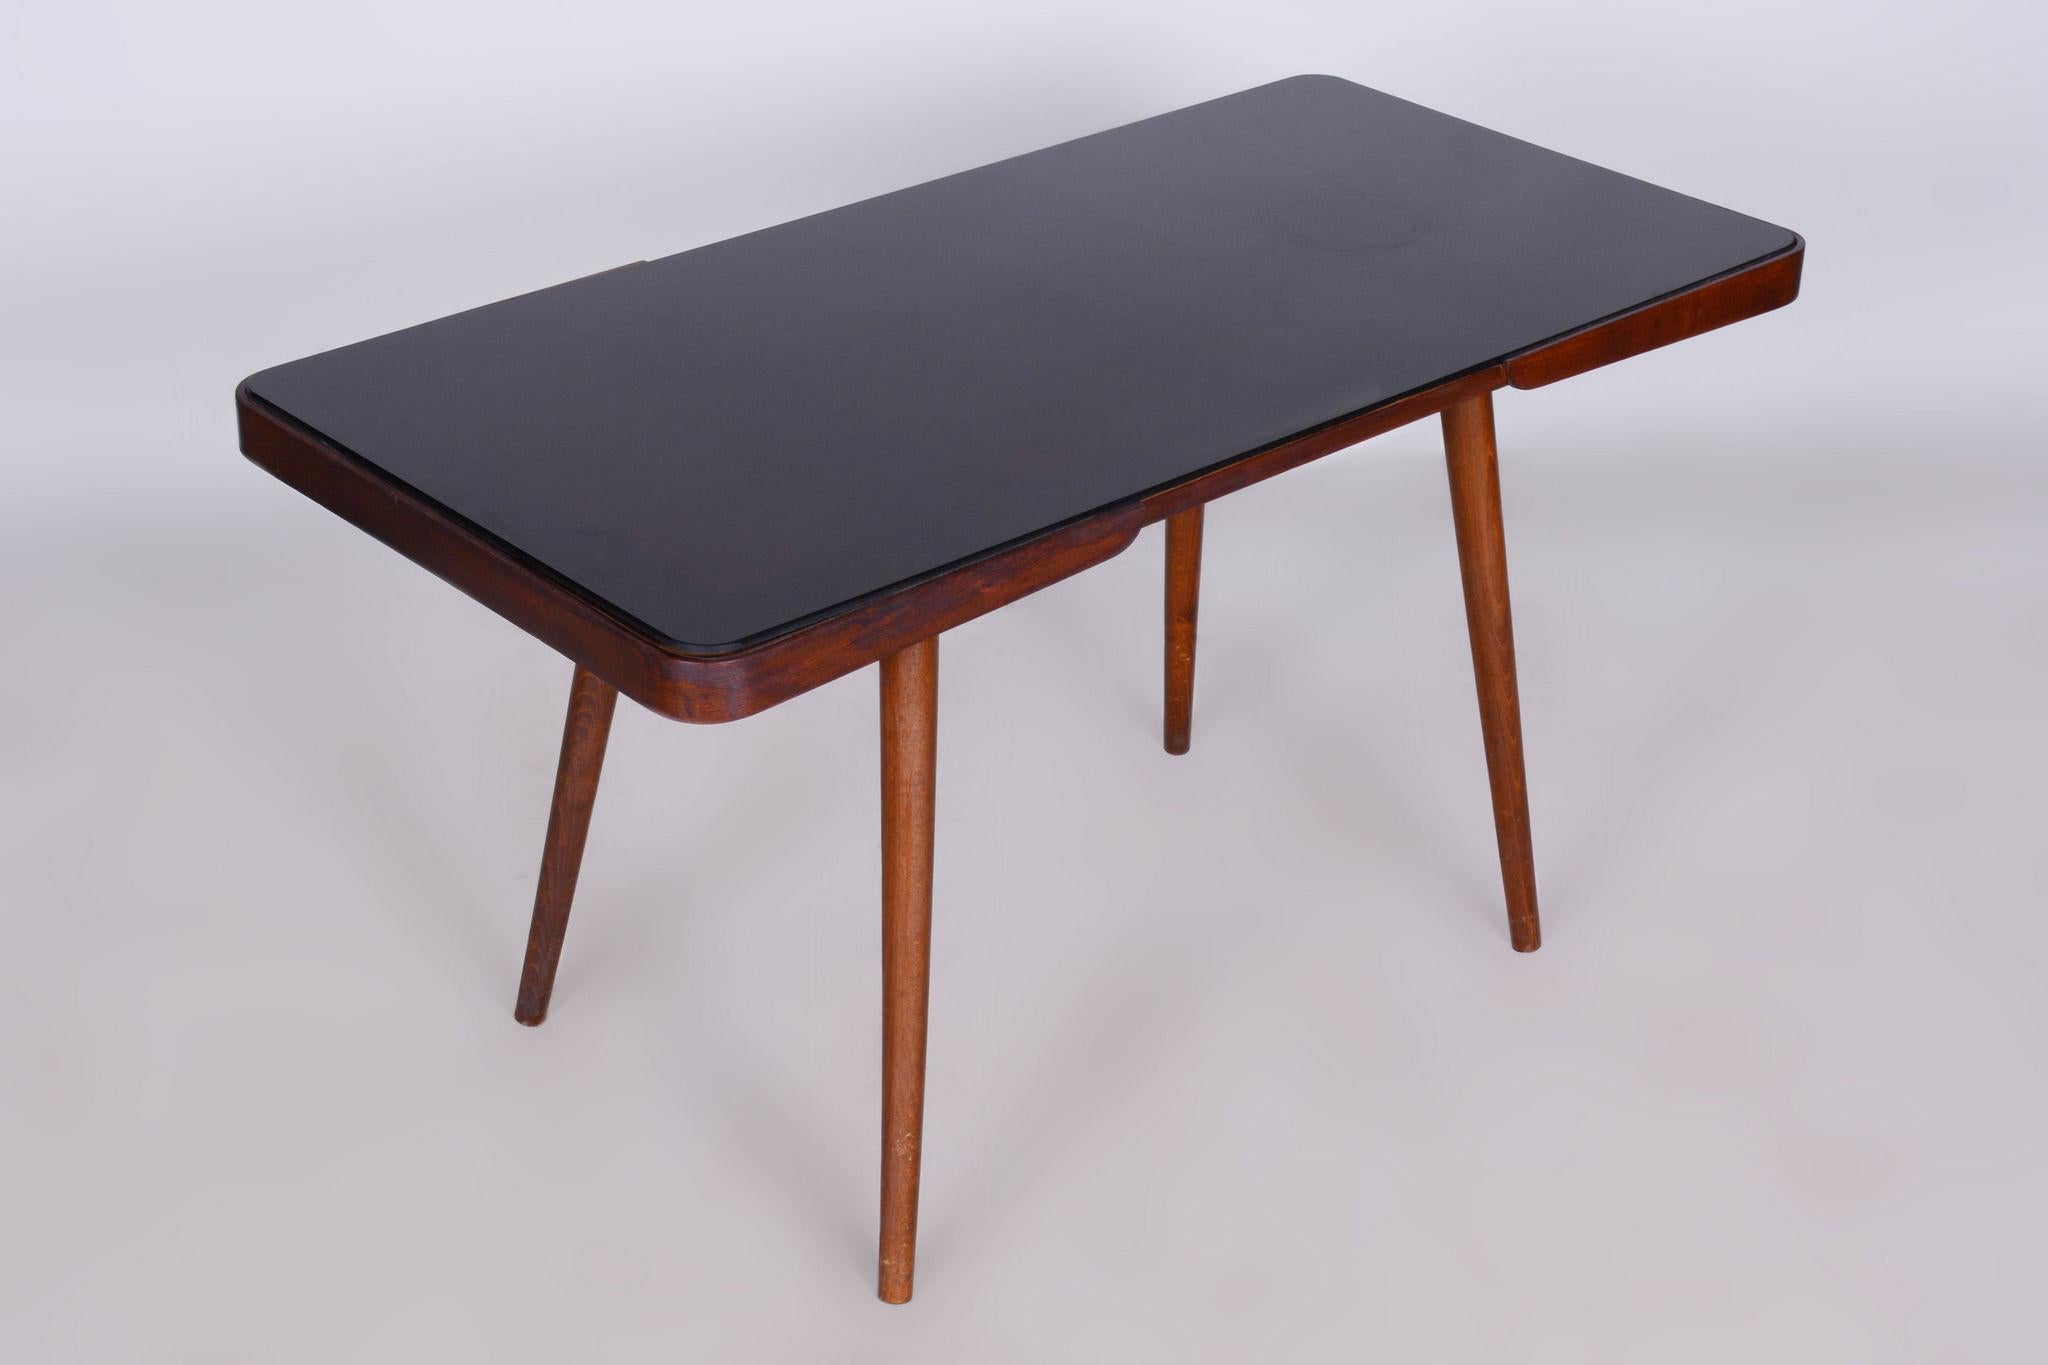 Original MidCentury Beech Coffee Table, Opaxit Glass, Interier Praha, Czechia In Good Condition For Sale In Horomerice, CZ